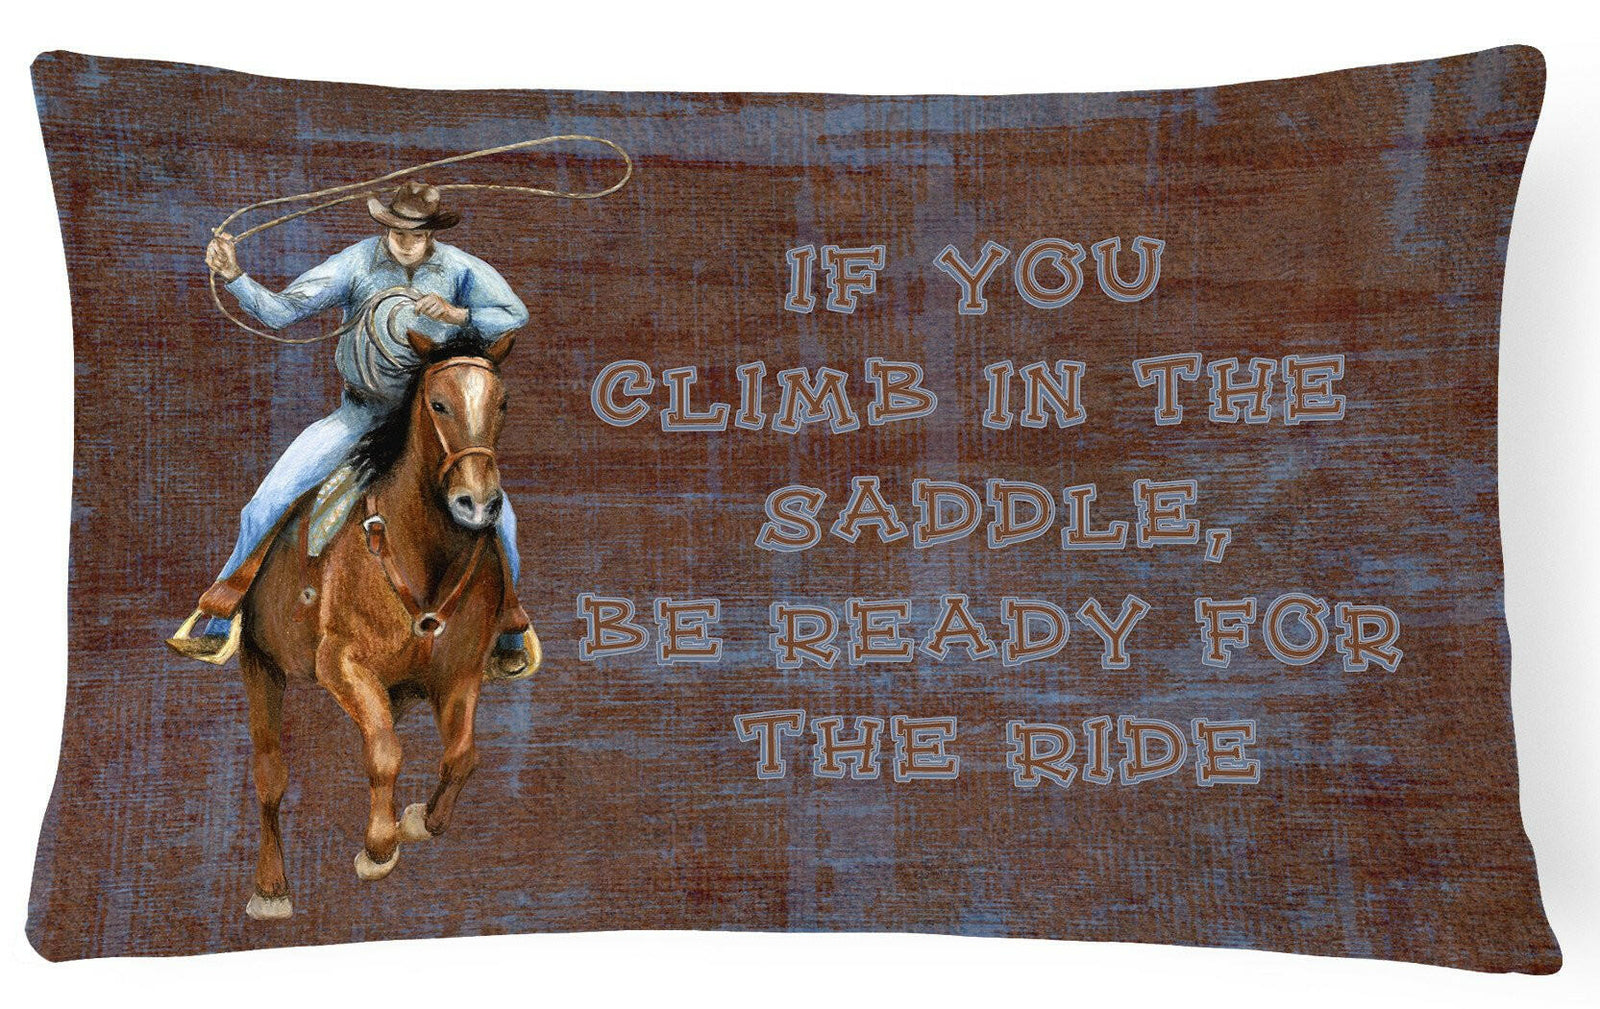 Roper Horse If you climb in the saddle, be ready for the ride   Canvas Fabric Decorative Pillow SB3061PW1216 by Caroline's Treasures